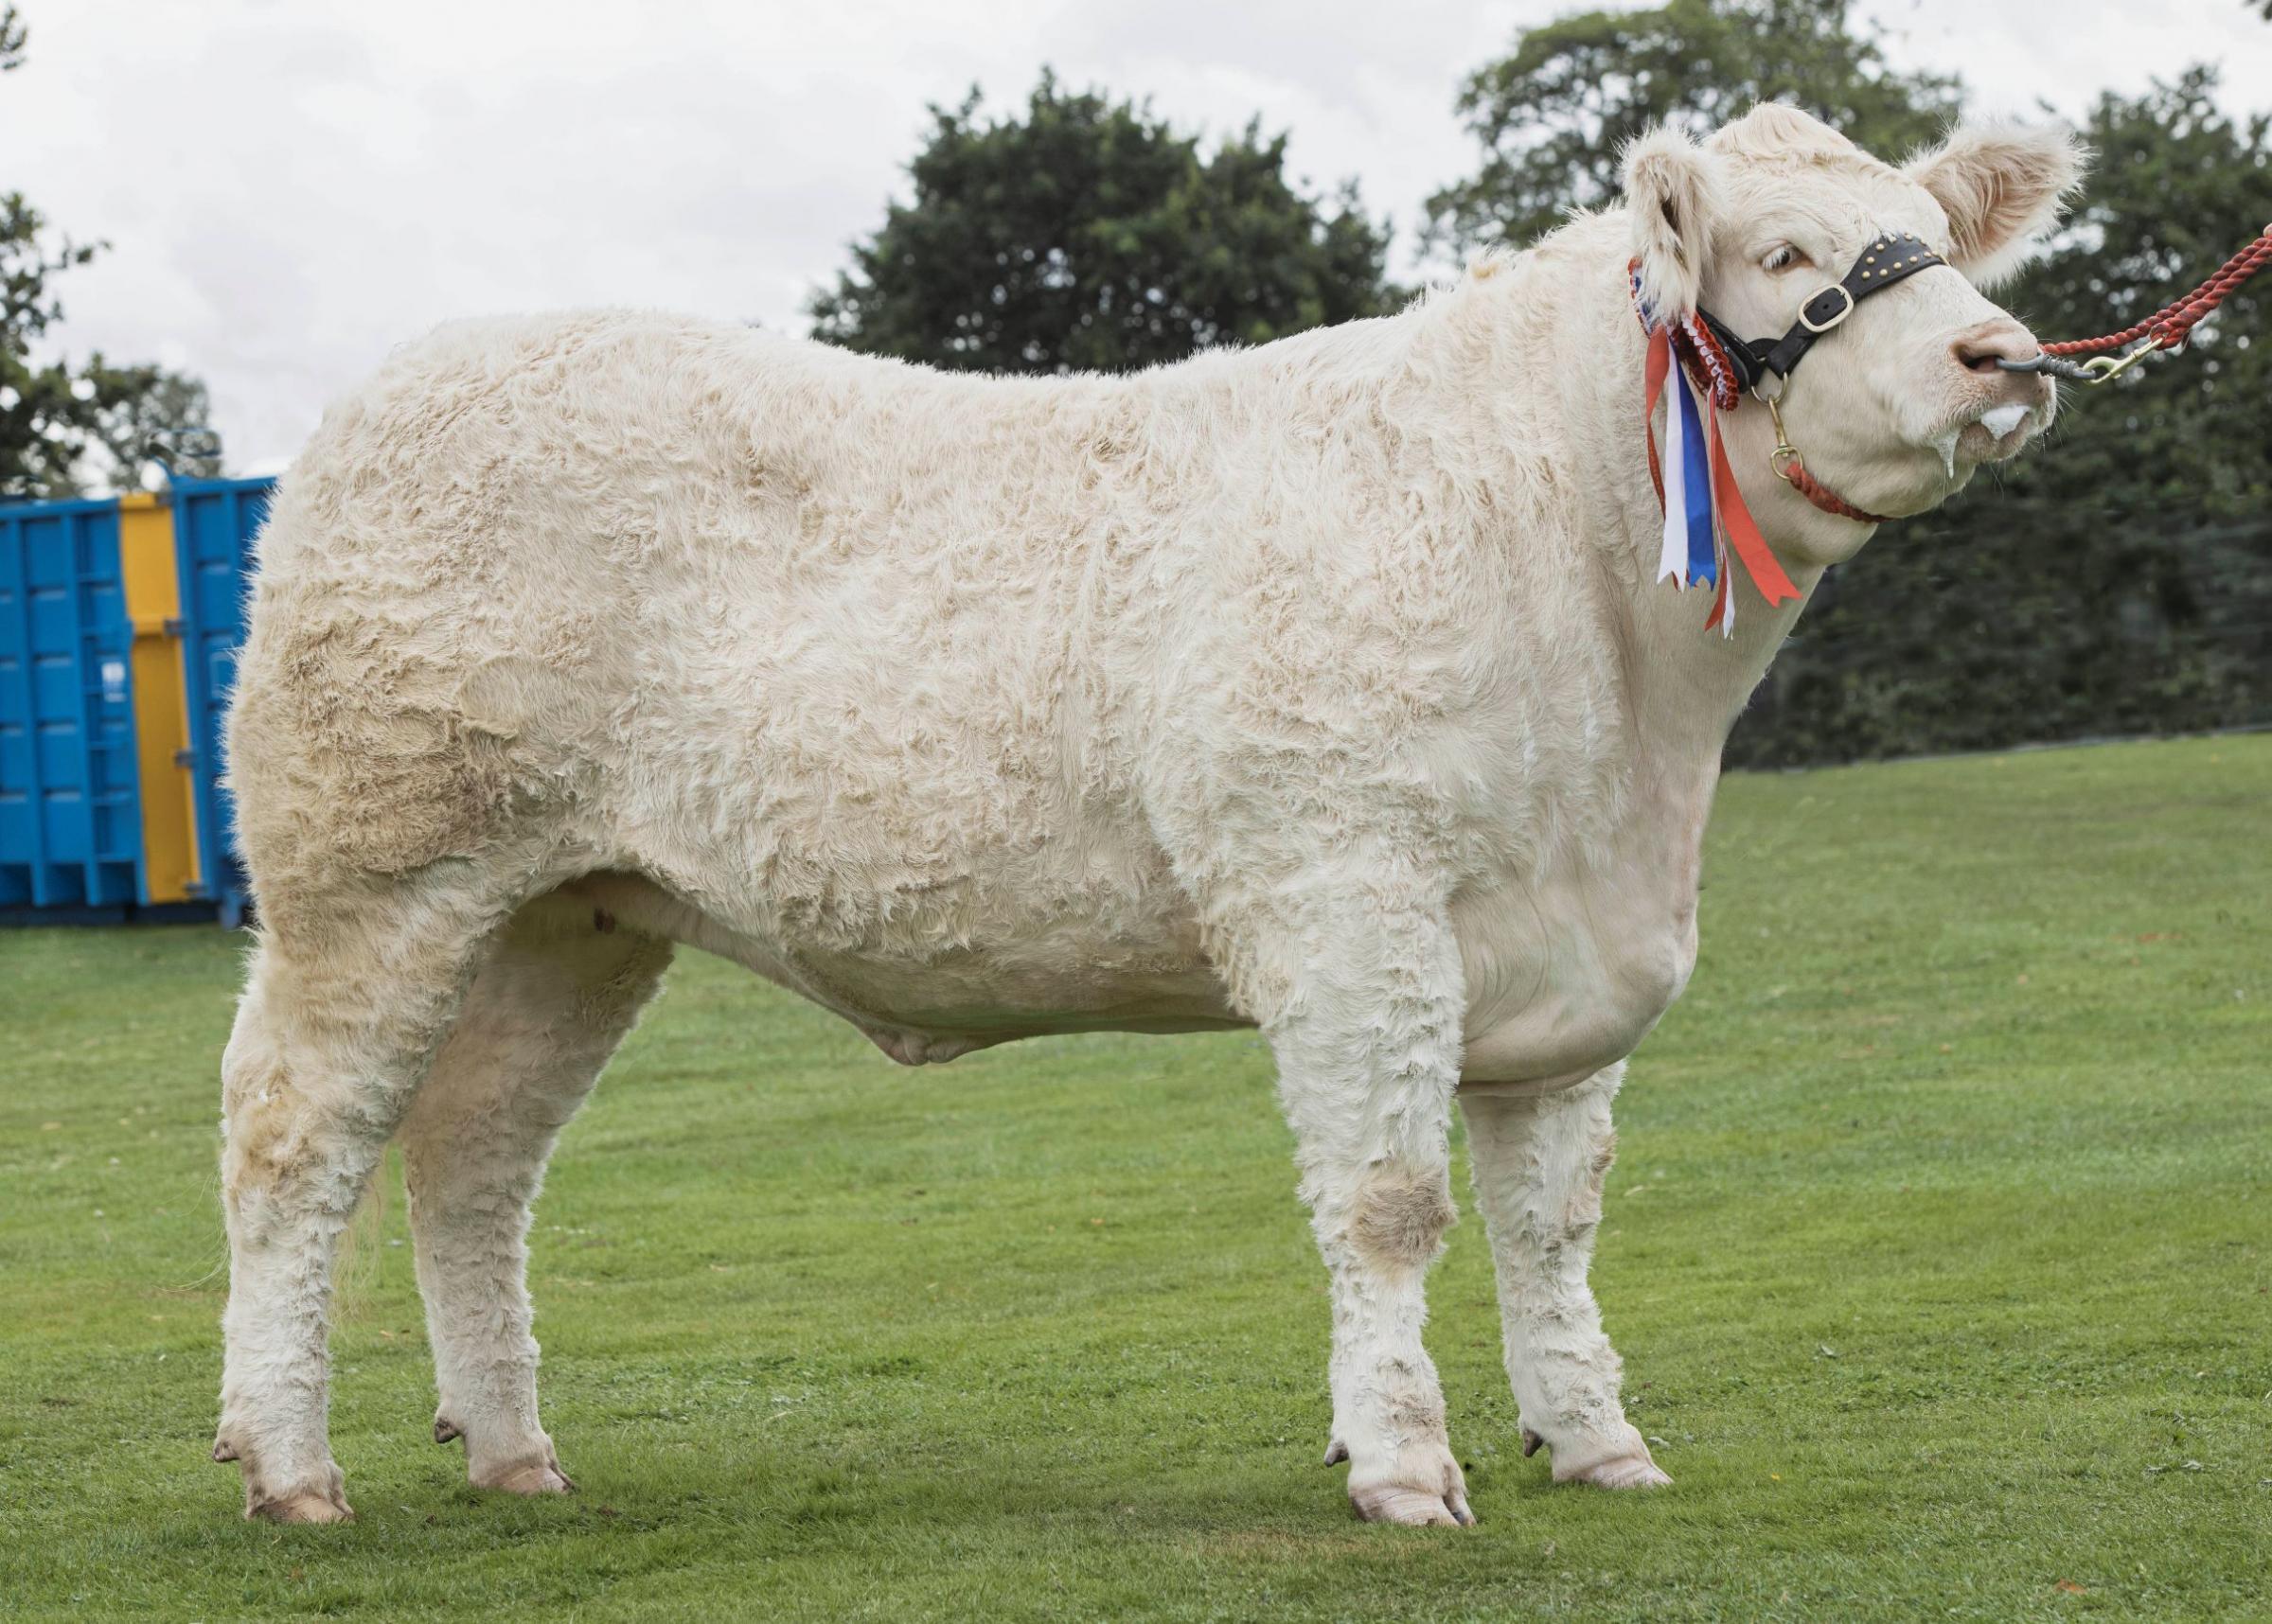 Burradon Raquel was the top Charolais and reserve inter-breed beef